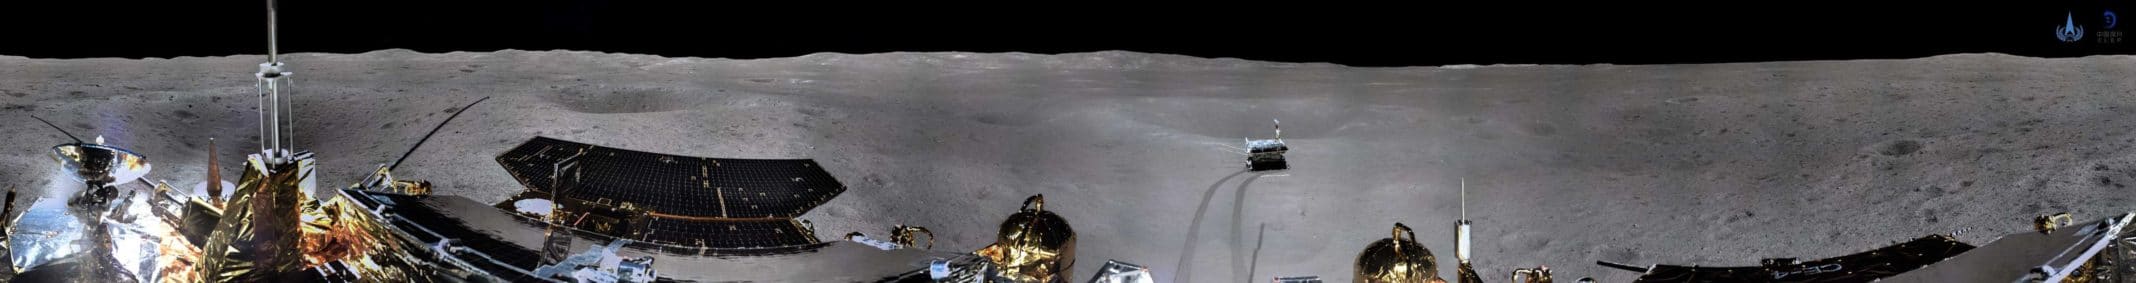 This picture released by the China National Space Administration (CNSA) via CNS shows a 360 degree panoramic image made by China's Chang'e-4 lunar probe on the far side of the moon. (AFP)